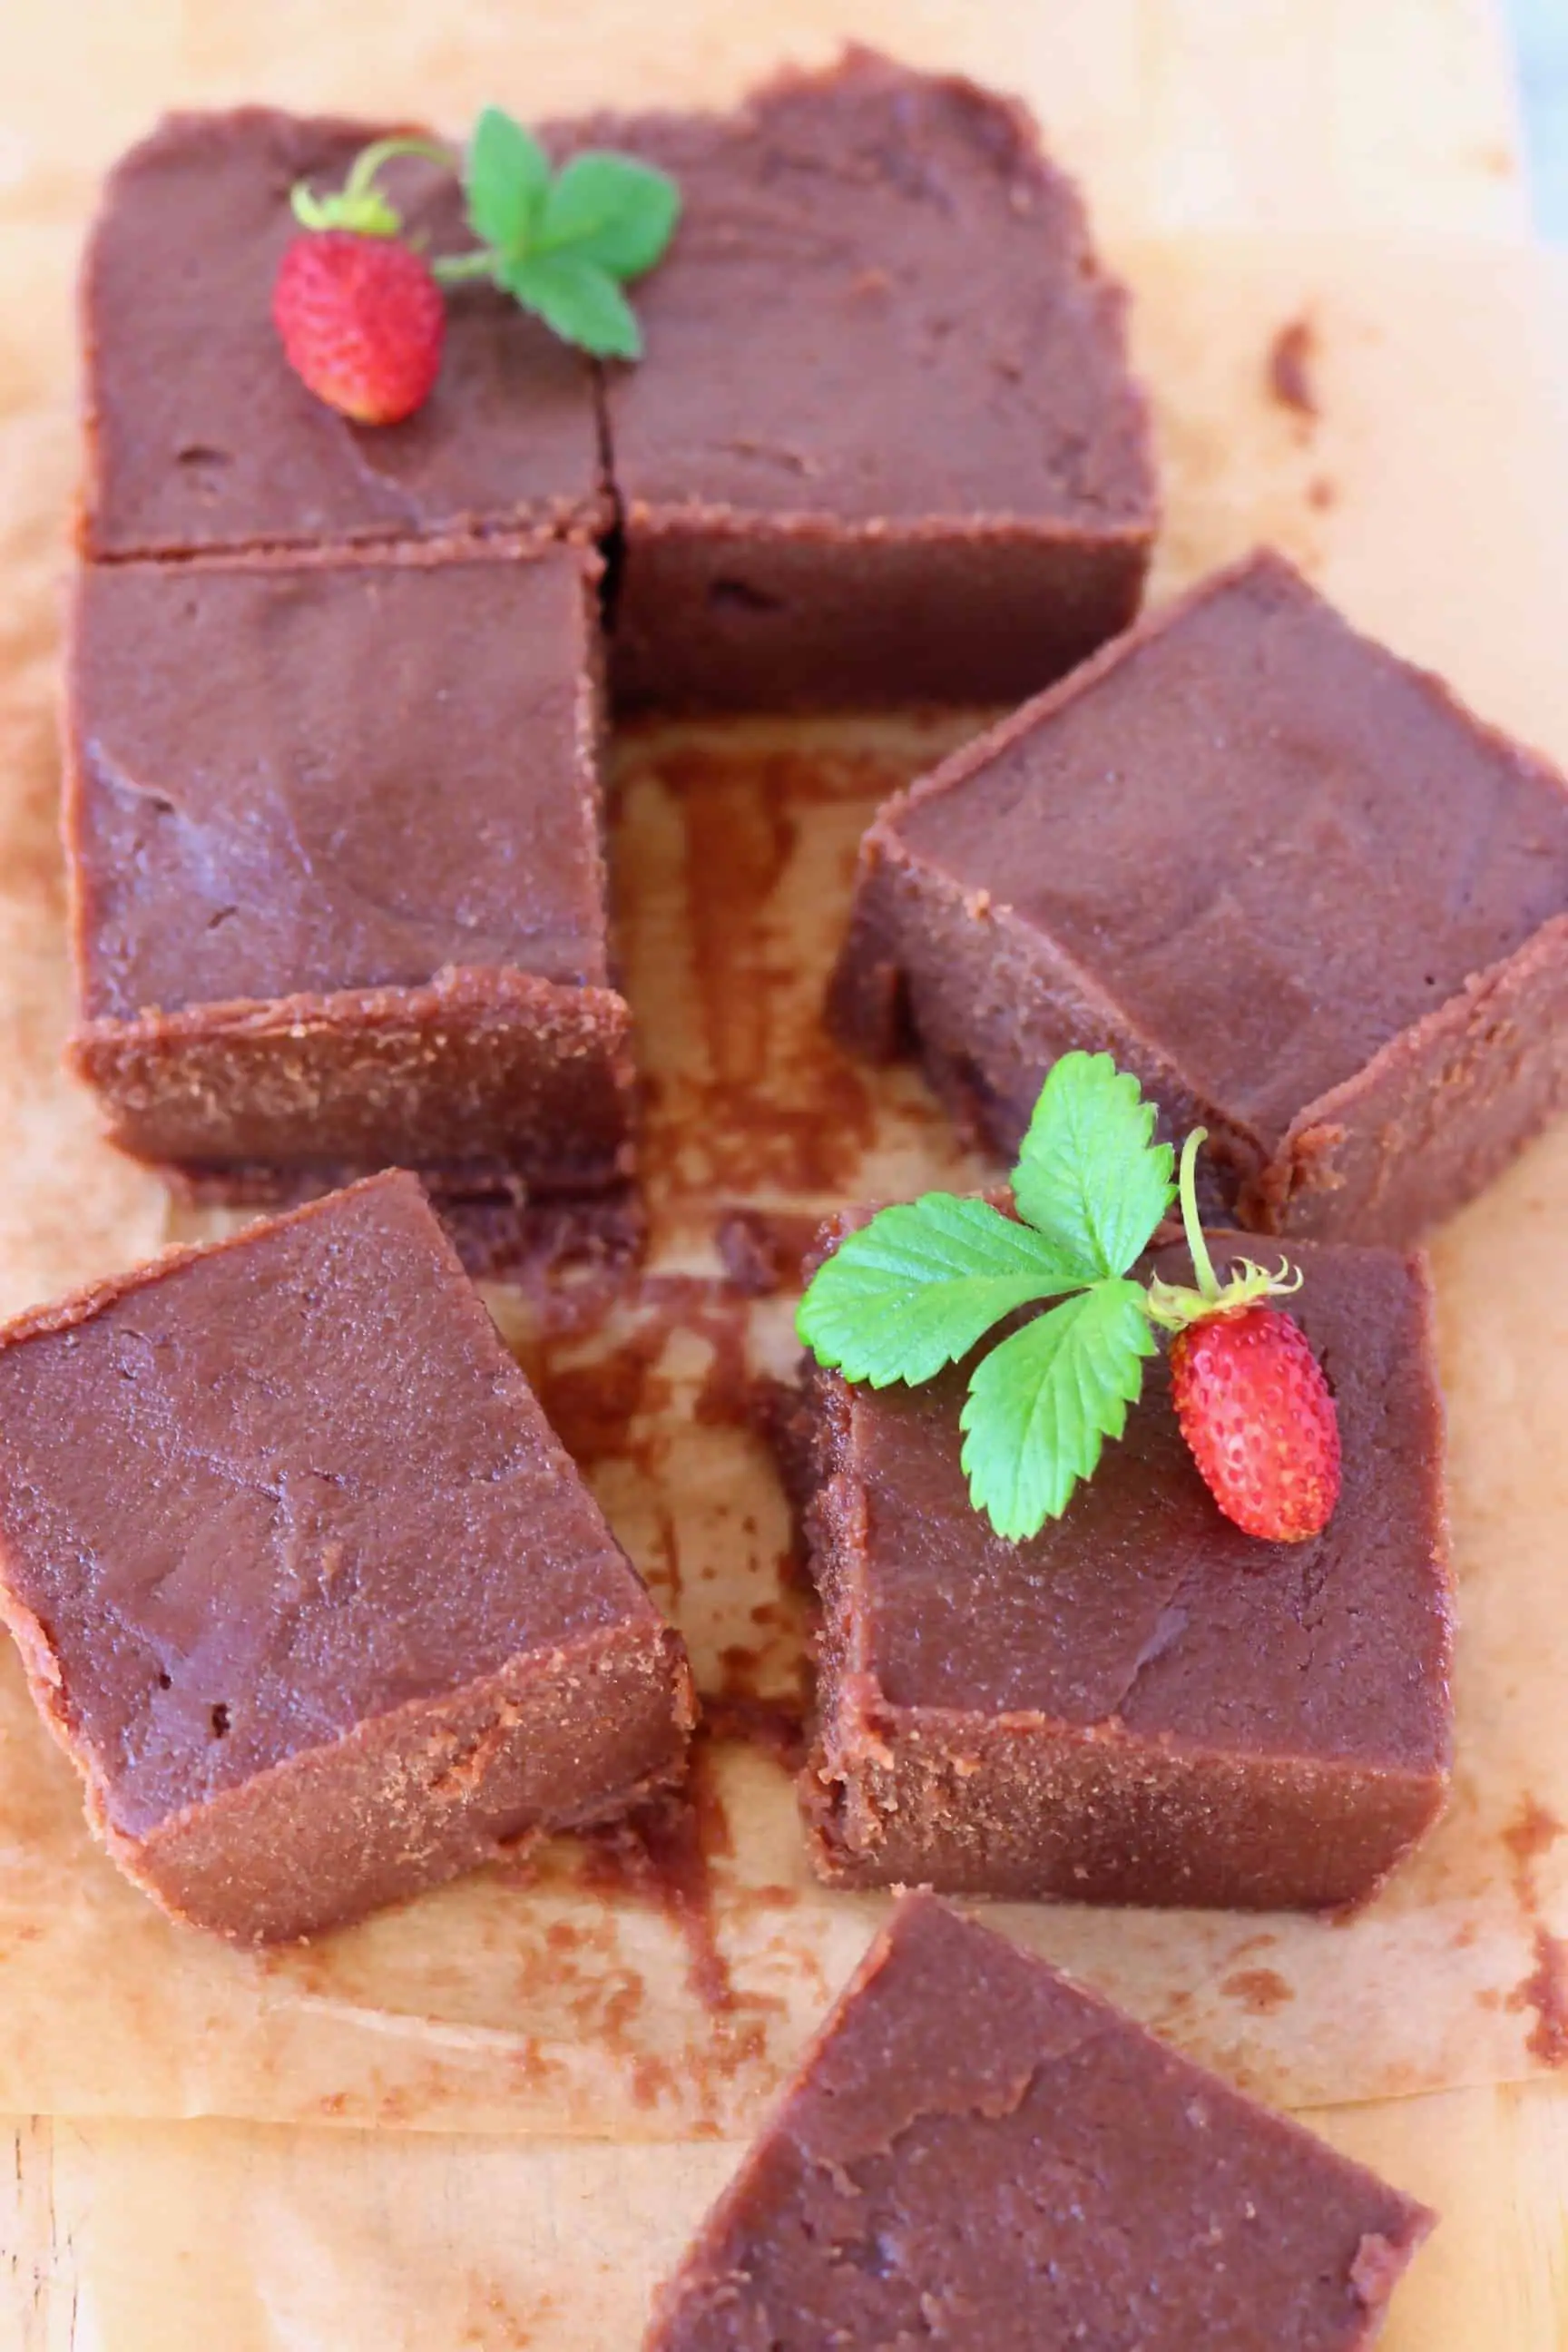 Seven square pieces of chocolate fudge on a sheet of brown baking paper decorated with mini strawberries with green leaves